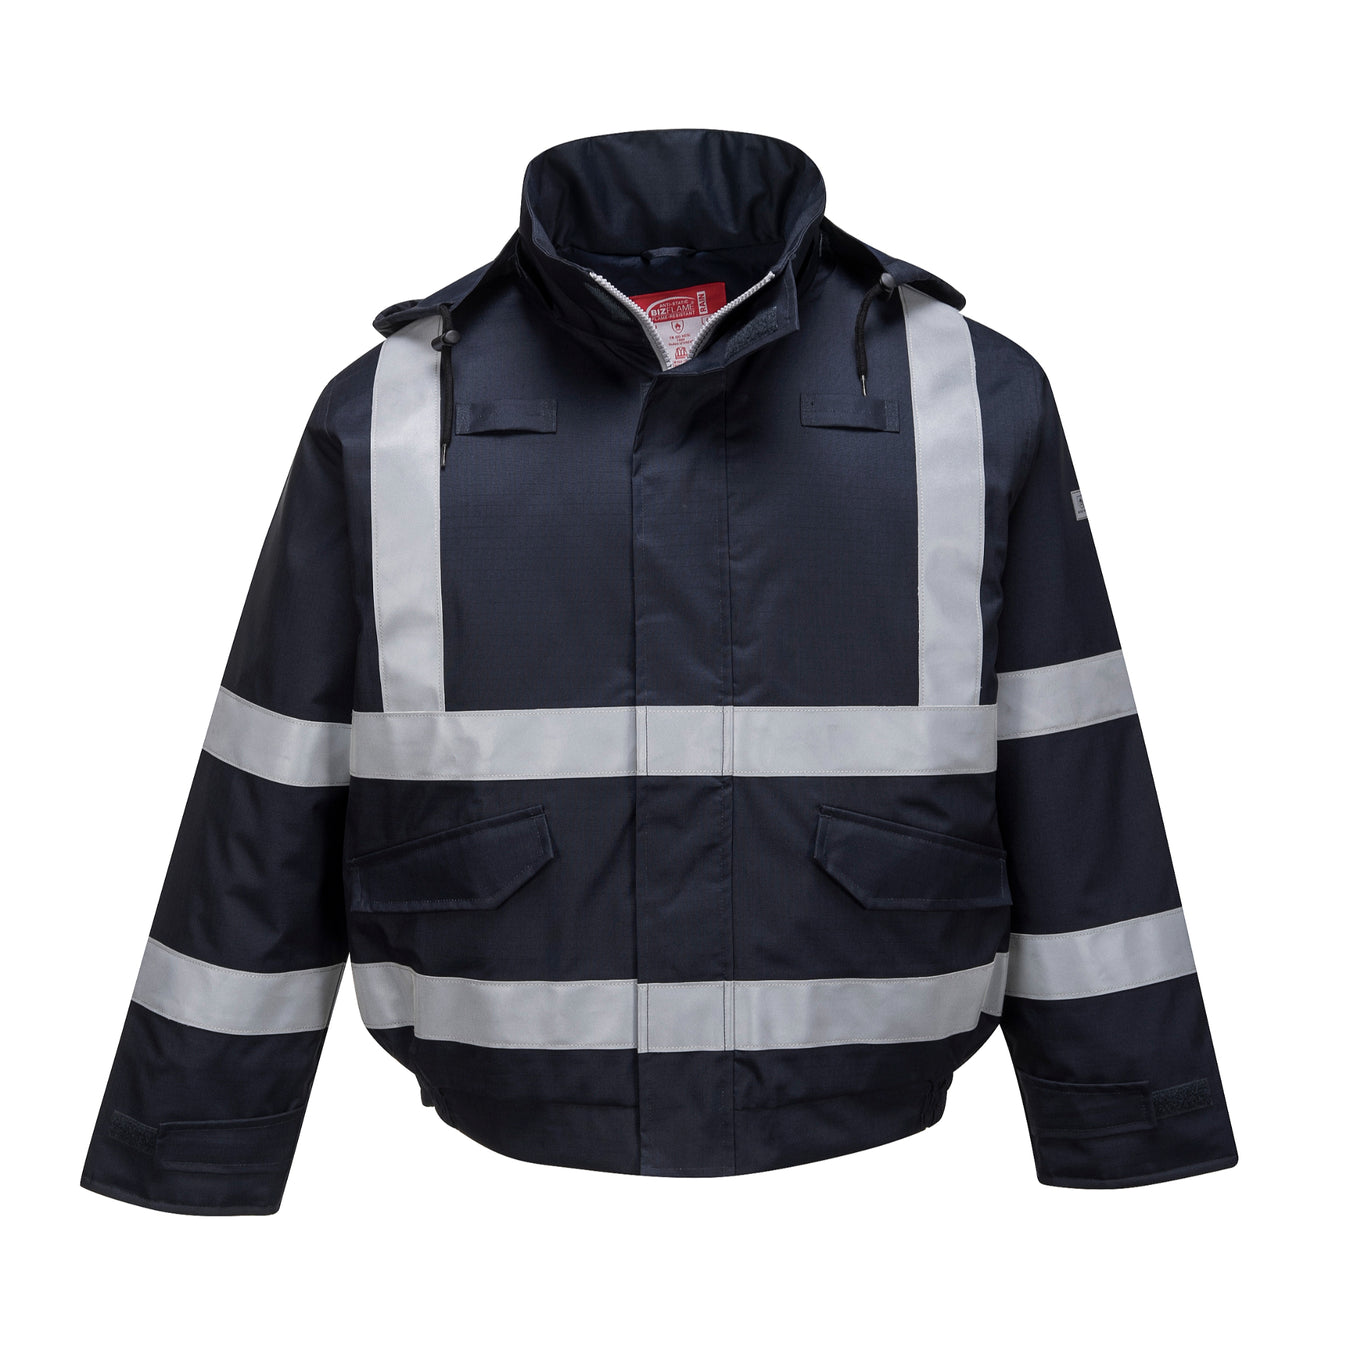 High Visibility Flame Resistant Jackets